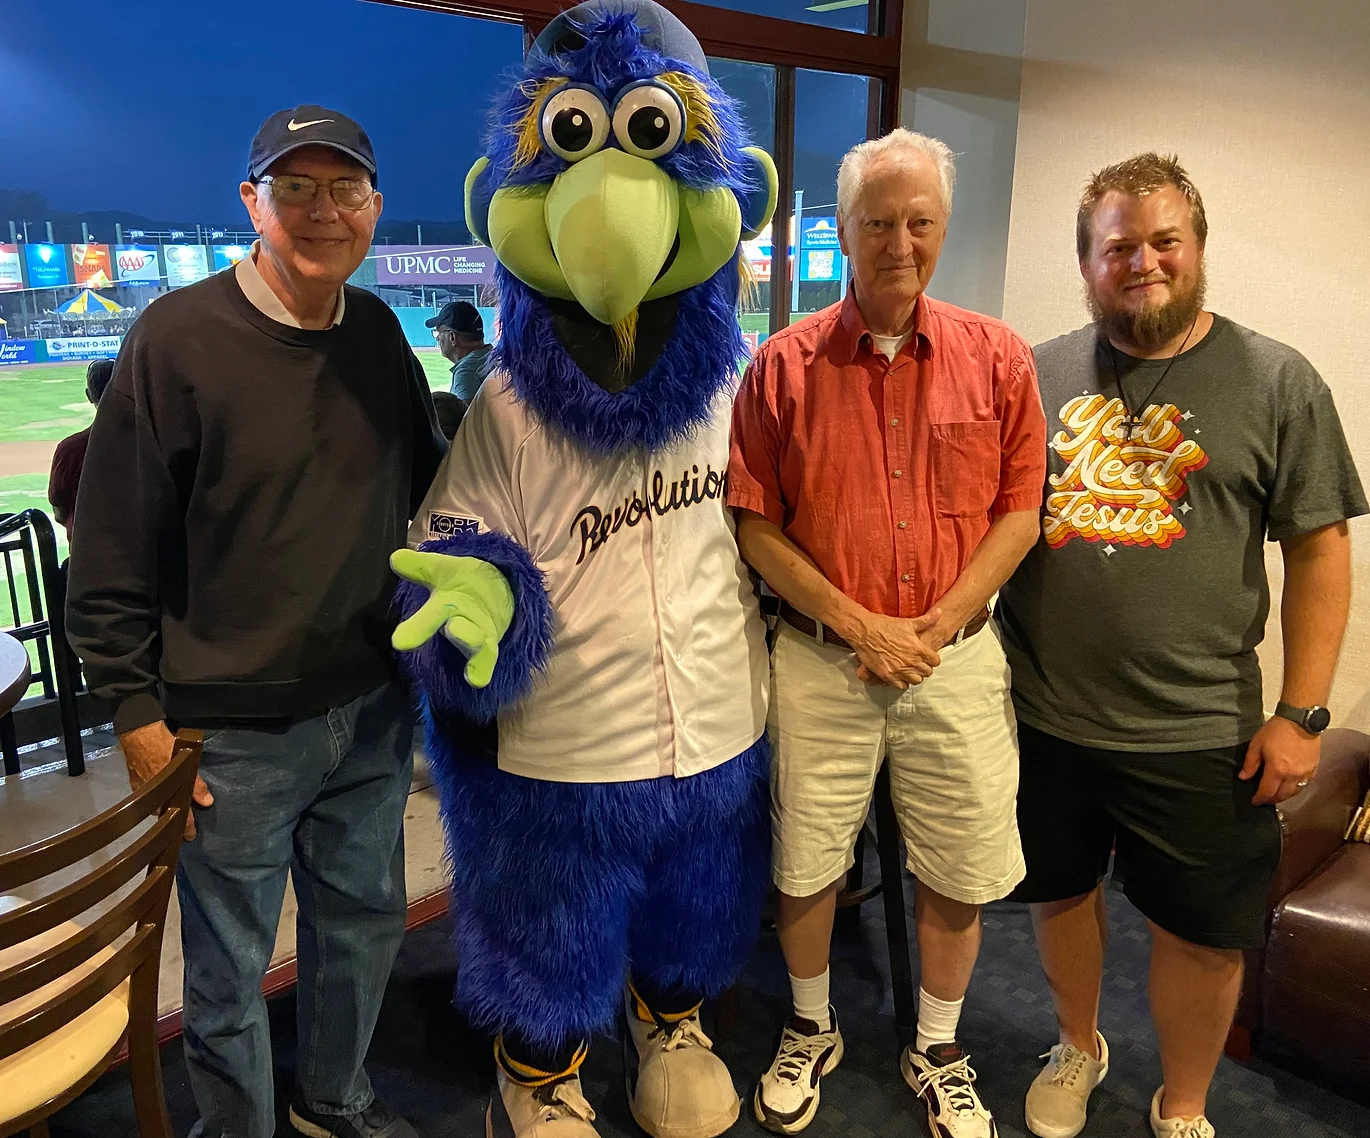 Mens Bible Study group with revs mascot